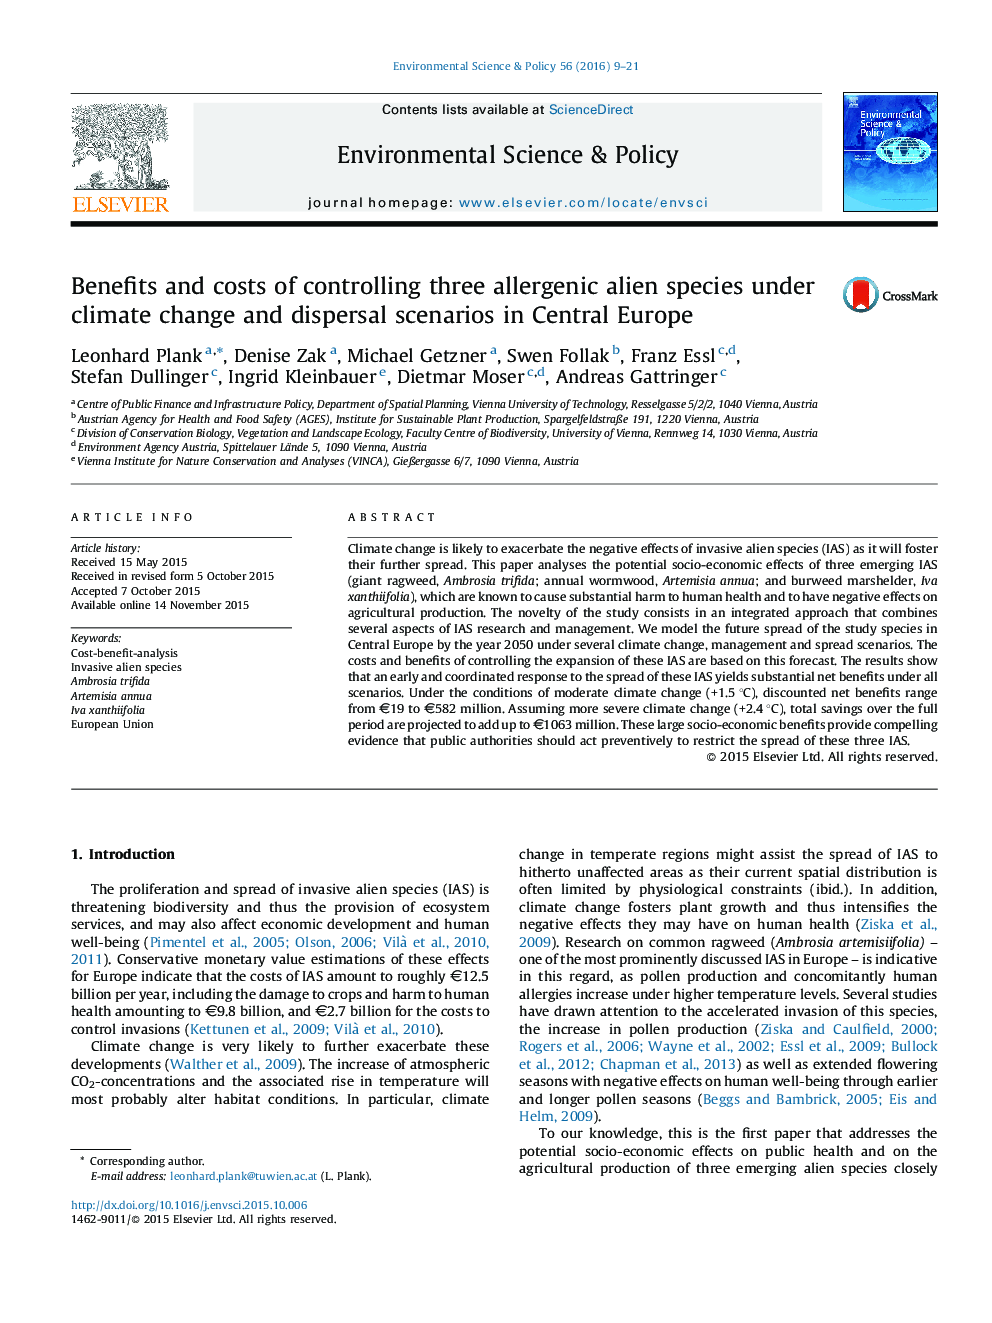 Benefits and costs of controlling three allergenic alien species under climate change and dispersal scenarios in Central Europe